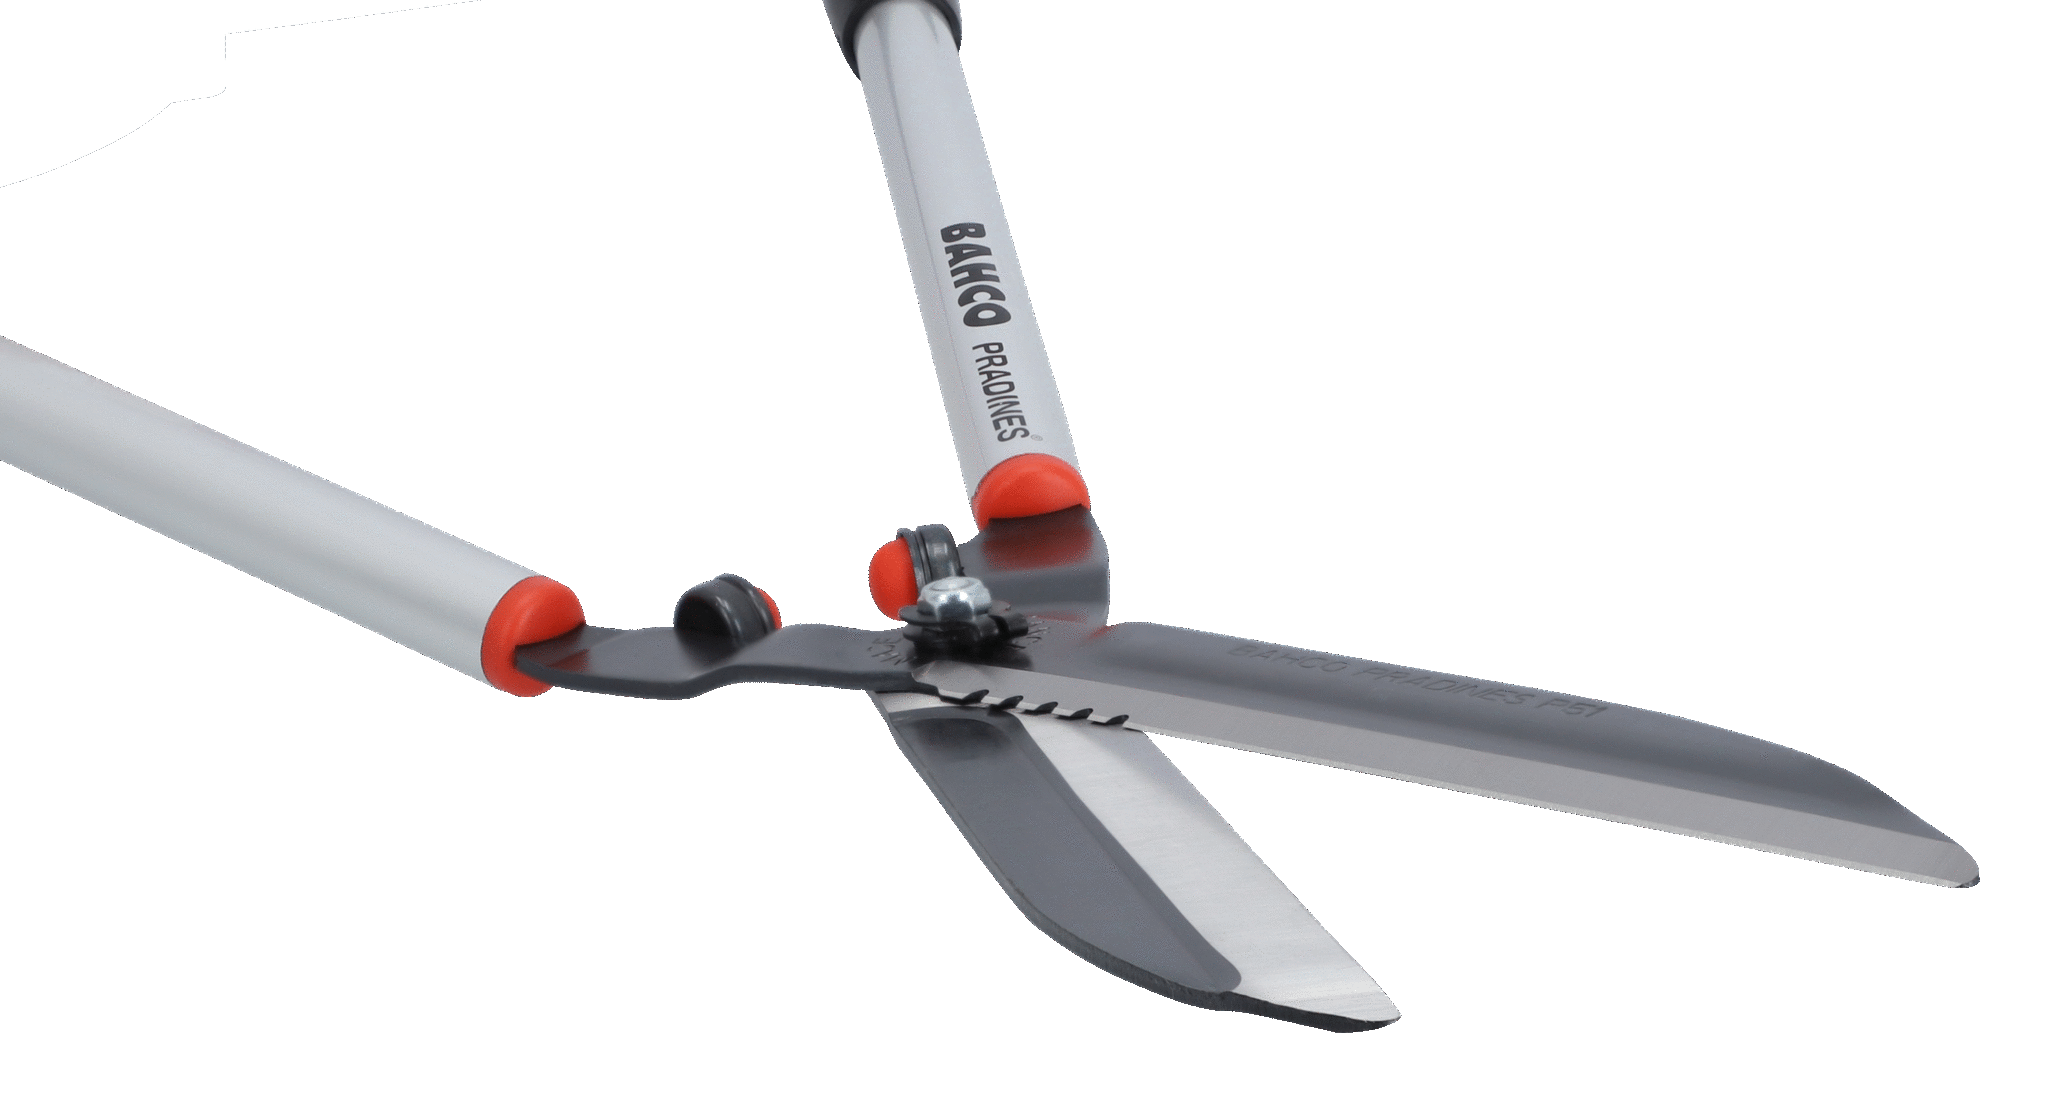 Heavy Duty Extra Long Lightweight Hedge Shears with Aluminium Handle - P51H-SL by Bahco